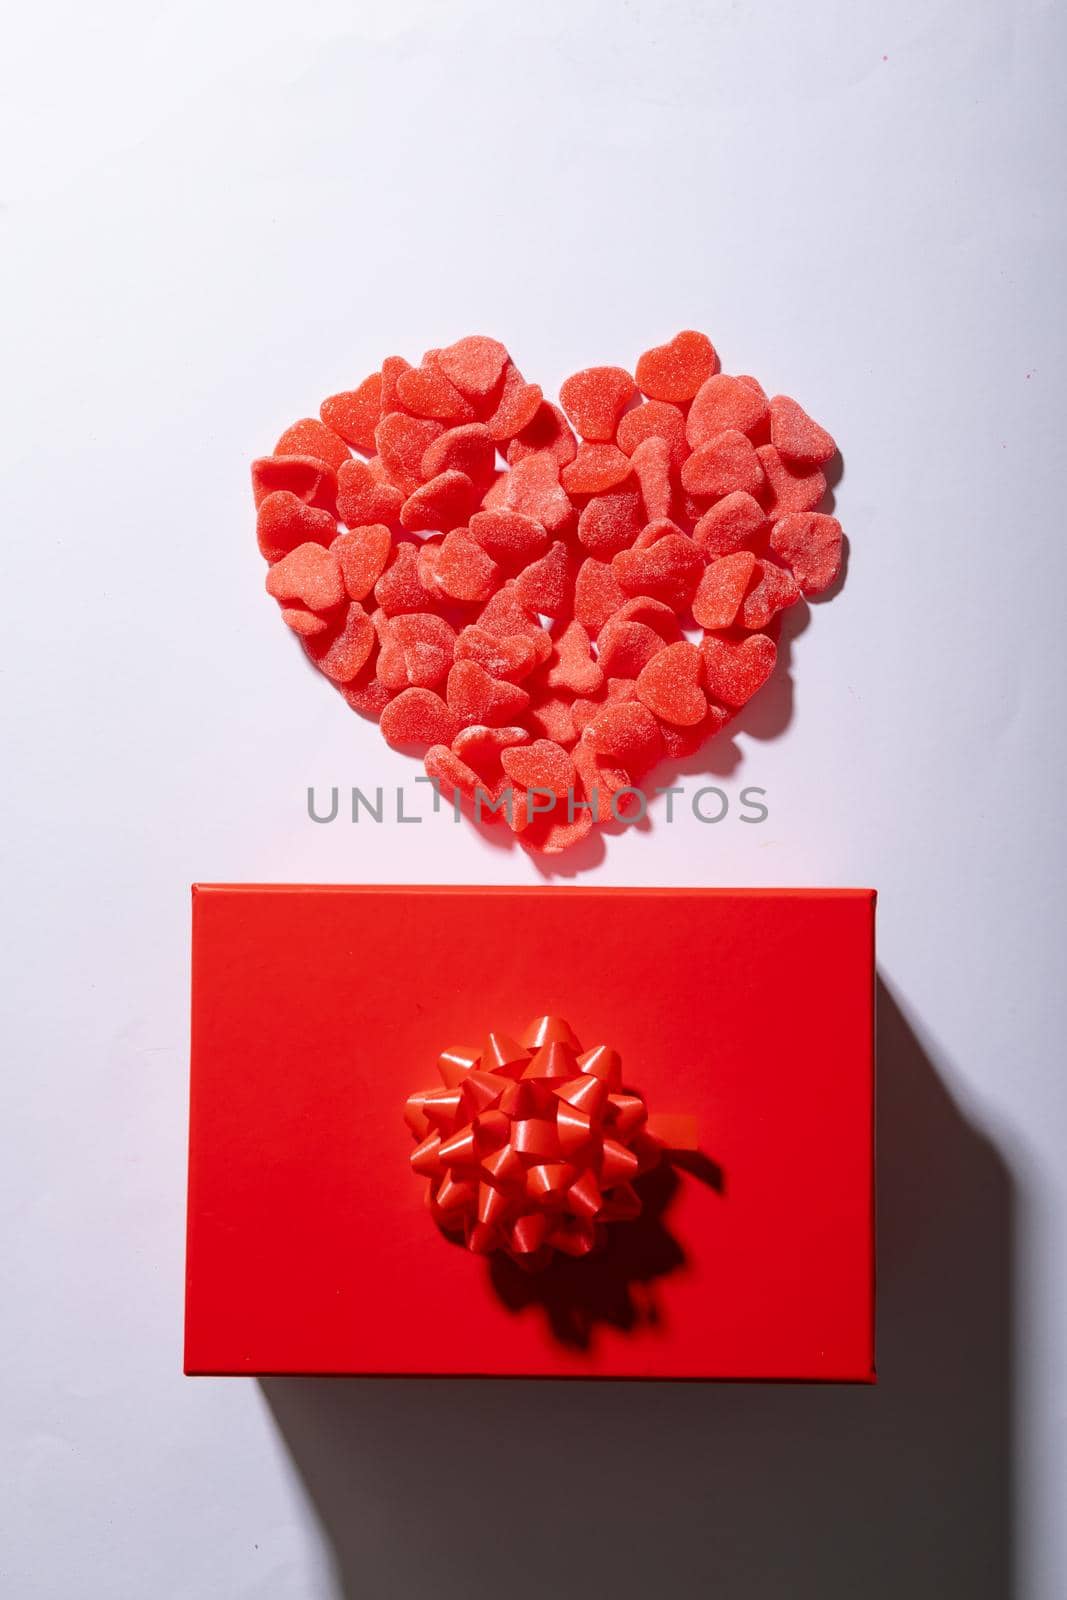 Overhead view of heart shaped red candies and gift box on white background, copy space by Wavebreakmedia